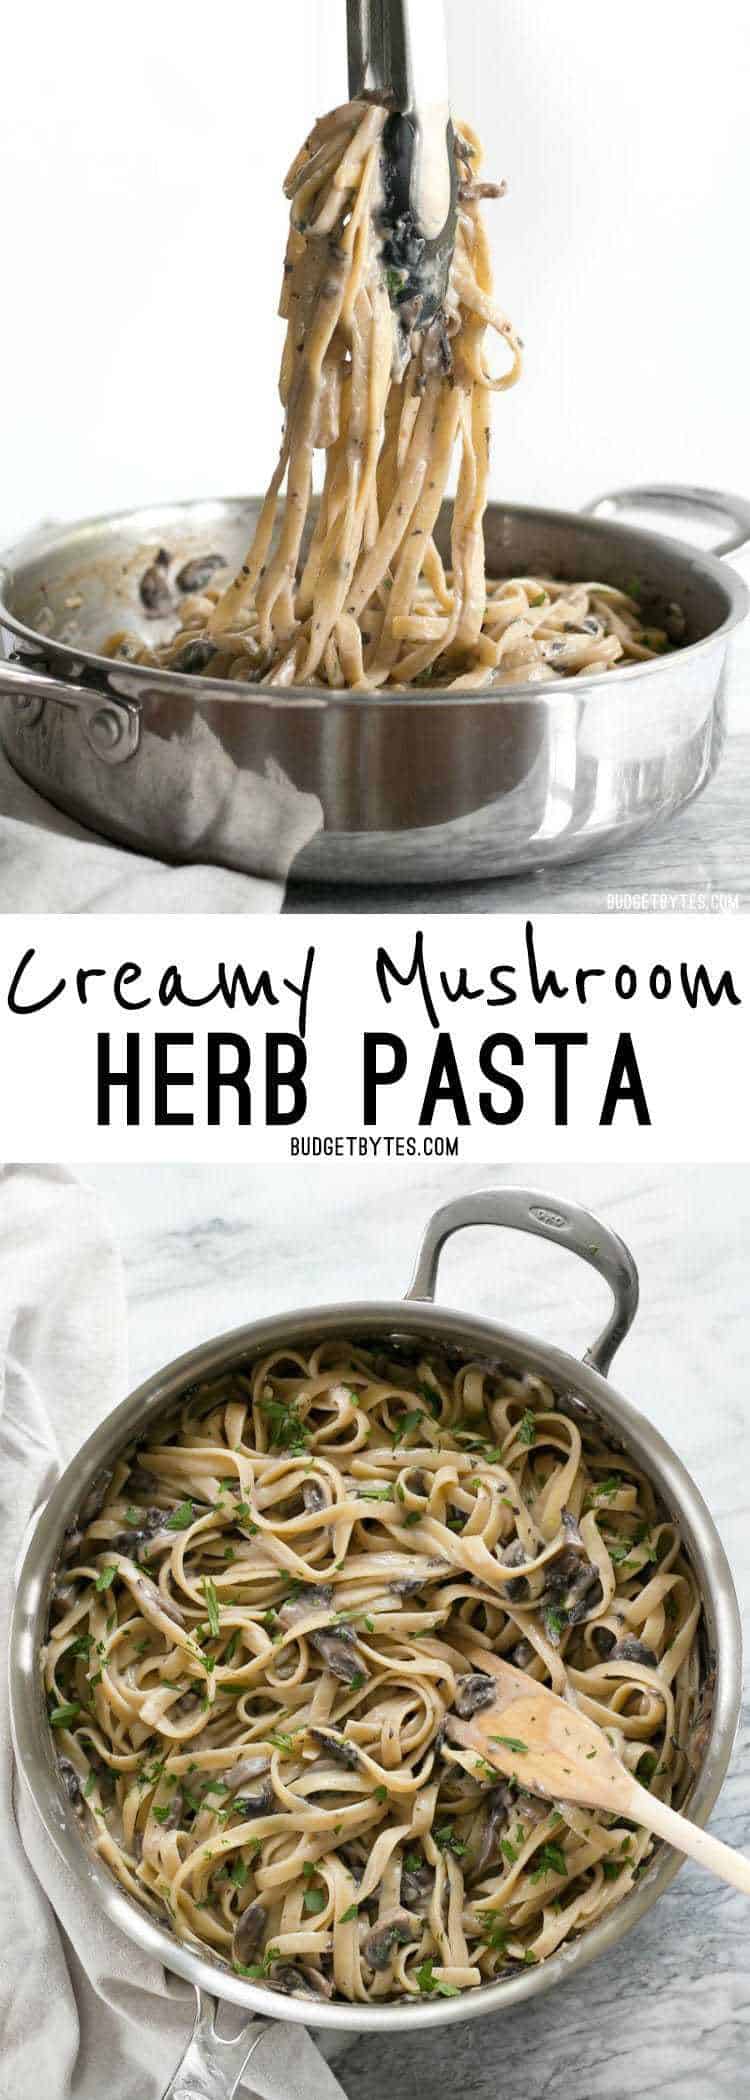 This rich and Creamy Mushroom Herb Pasta is a surprisingly fast and simple to way to have a gourmet meal at home. BudgetBytes.com